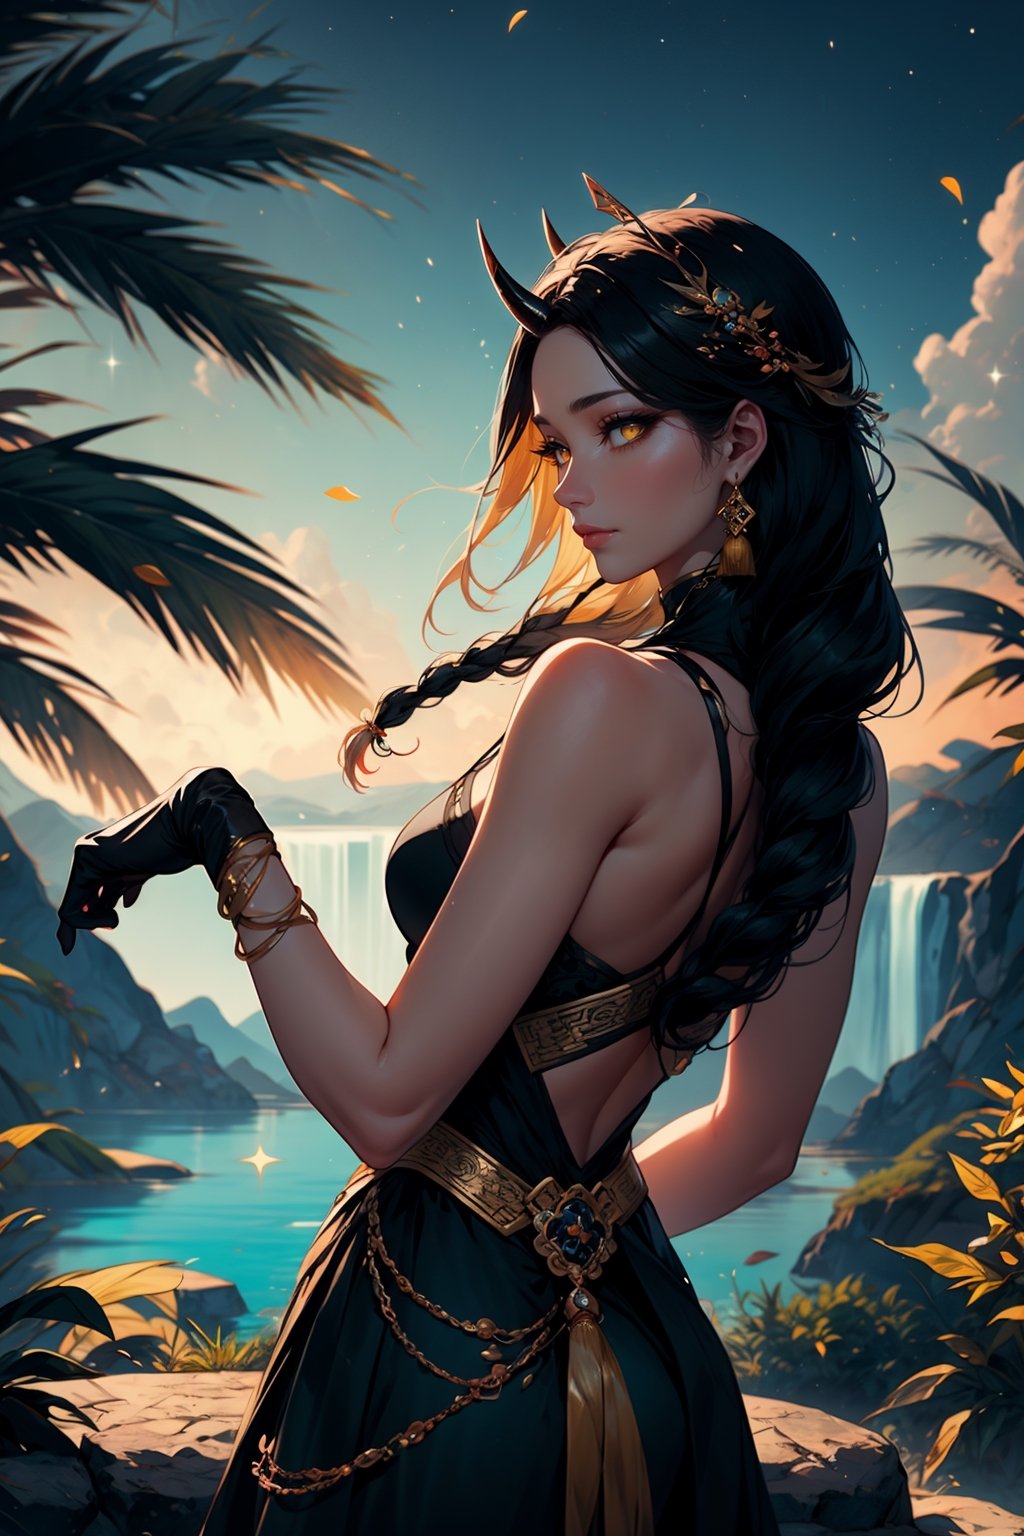 In the serene embrace of a mythical Chinese oasis, a captivating enchantress with luscious black hair and elegant horns graces the scene. Adorned in a resplendent skirt and black gloves, she stands with an air of regal allure, her yellow eyes reflecting the tranquility of the sky above. Very long hair, braided with delicate precision, flows gracefully down her back, mirroring the enchanting cascade of a waterfall nearby.

Unbeknownst to her, the benevolent spirit Bai Ze, a mythical creature in Chinese folklore renowned for its wisdom and insight, observes from the shadow of a palm tree. With a celestial glow and wise eyes, Bai Ze appreciates the enchantress's connection to nature and the harmonious surroundings. The luxurious prombit unfolds as the enchantress and Bai Ze share a moment of unity, blending the realms of earthly beauty and mythical grace within the enchanting oasis of Chinese myth.